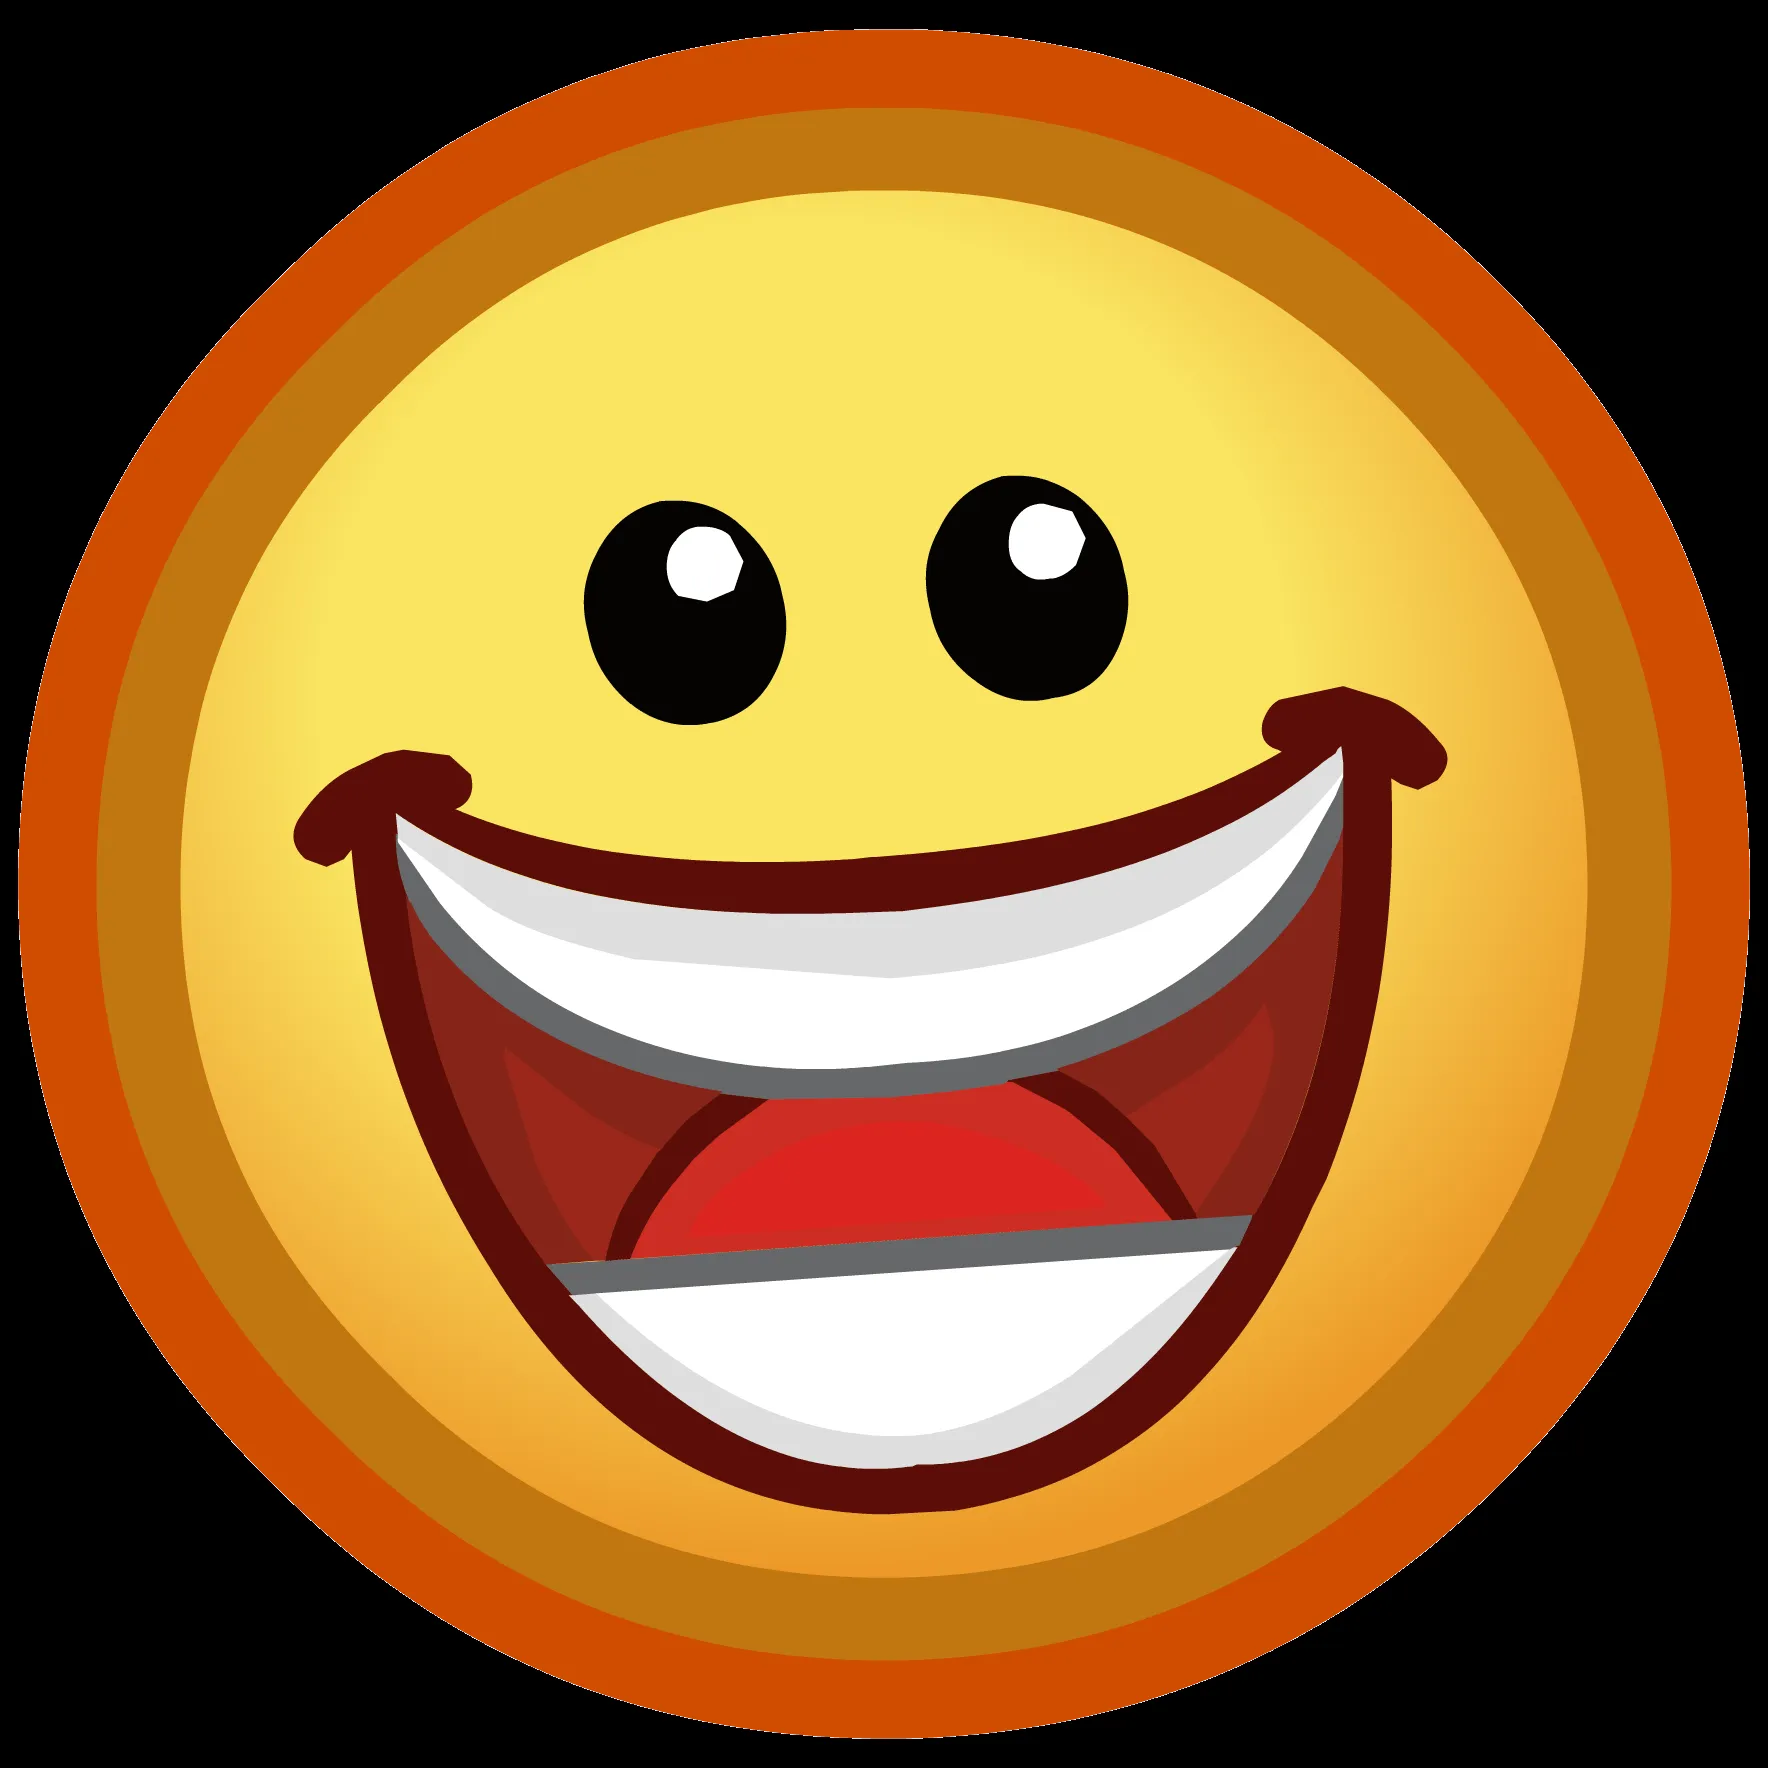 Image - Put on your happy face.png - Club Penguin Wiki - The free ...